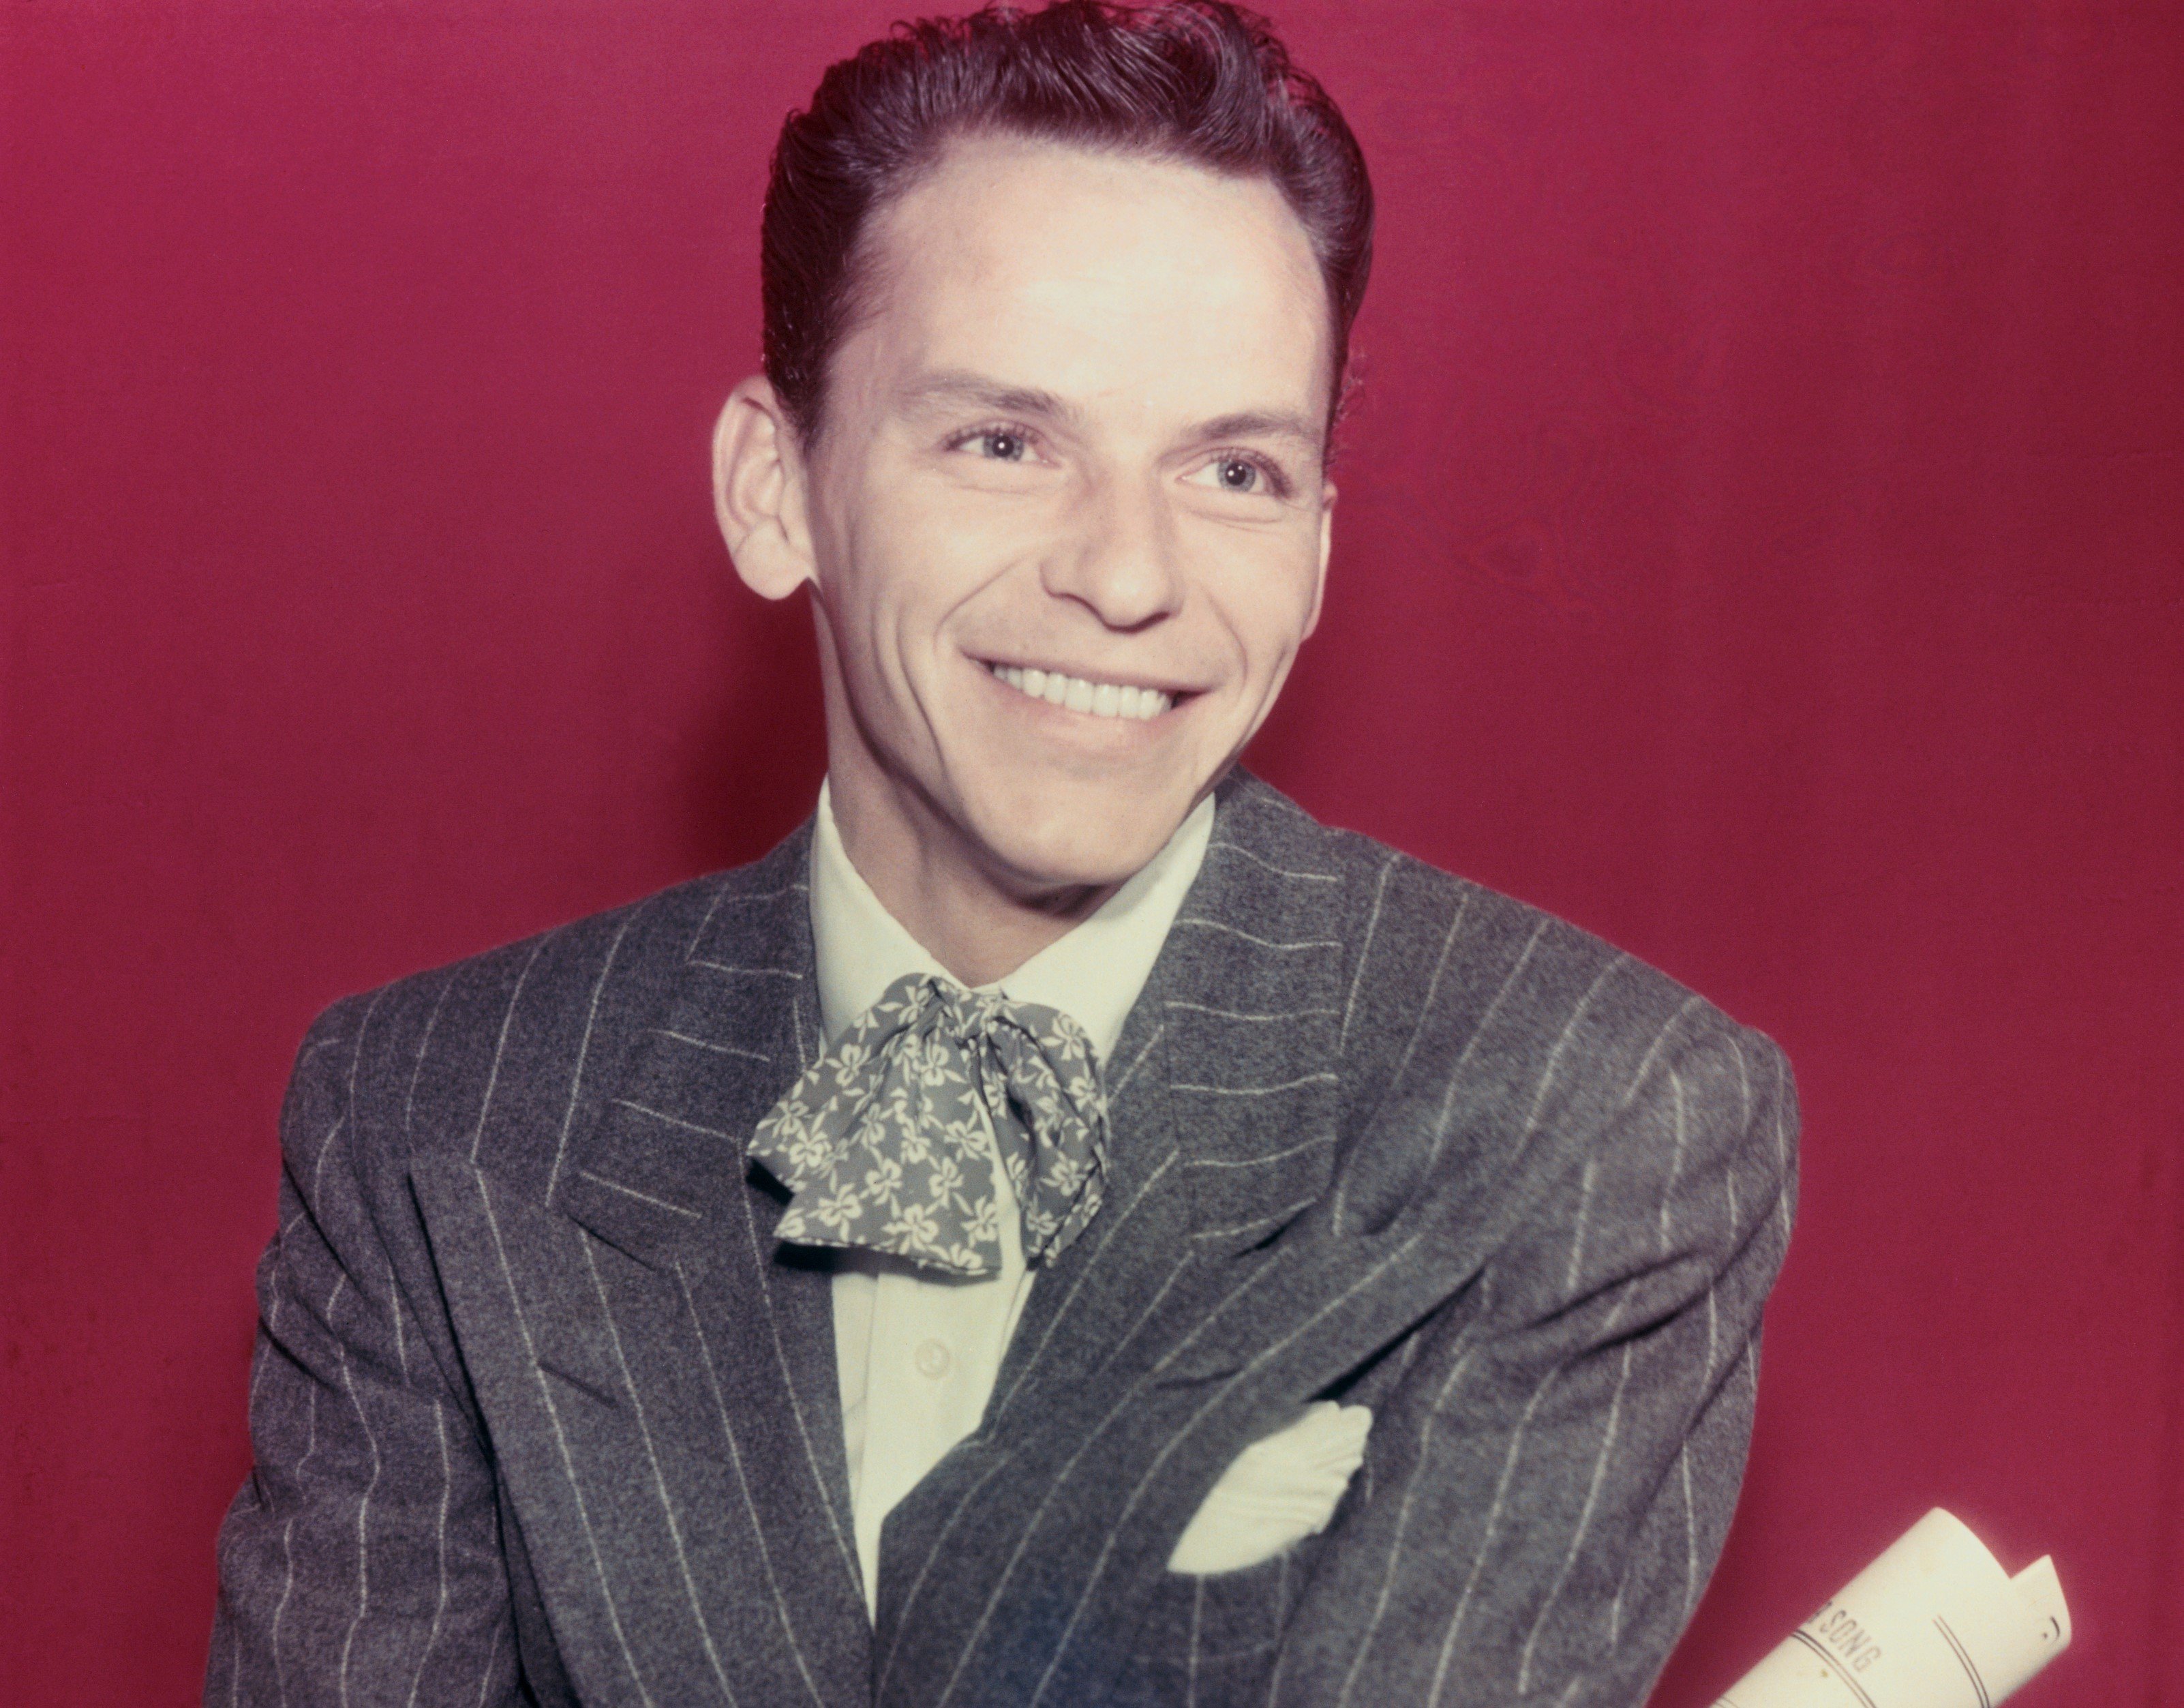 Frank Sinatra wears a gray suit and holds a rolled up paper. He sits against a maroon background.